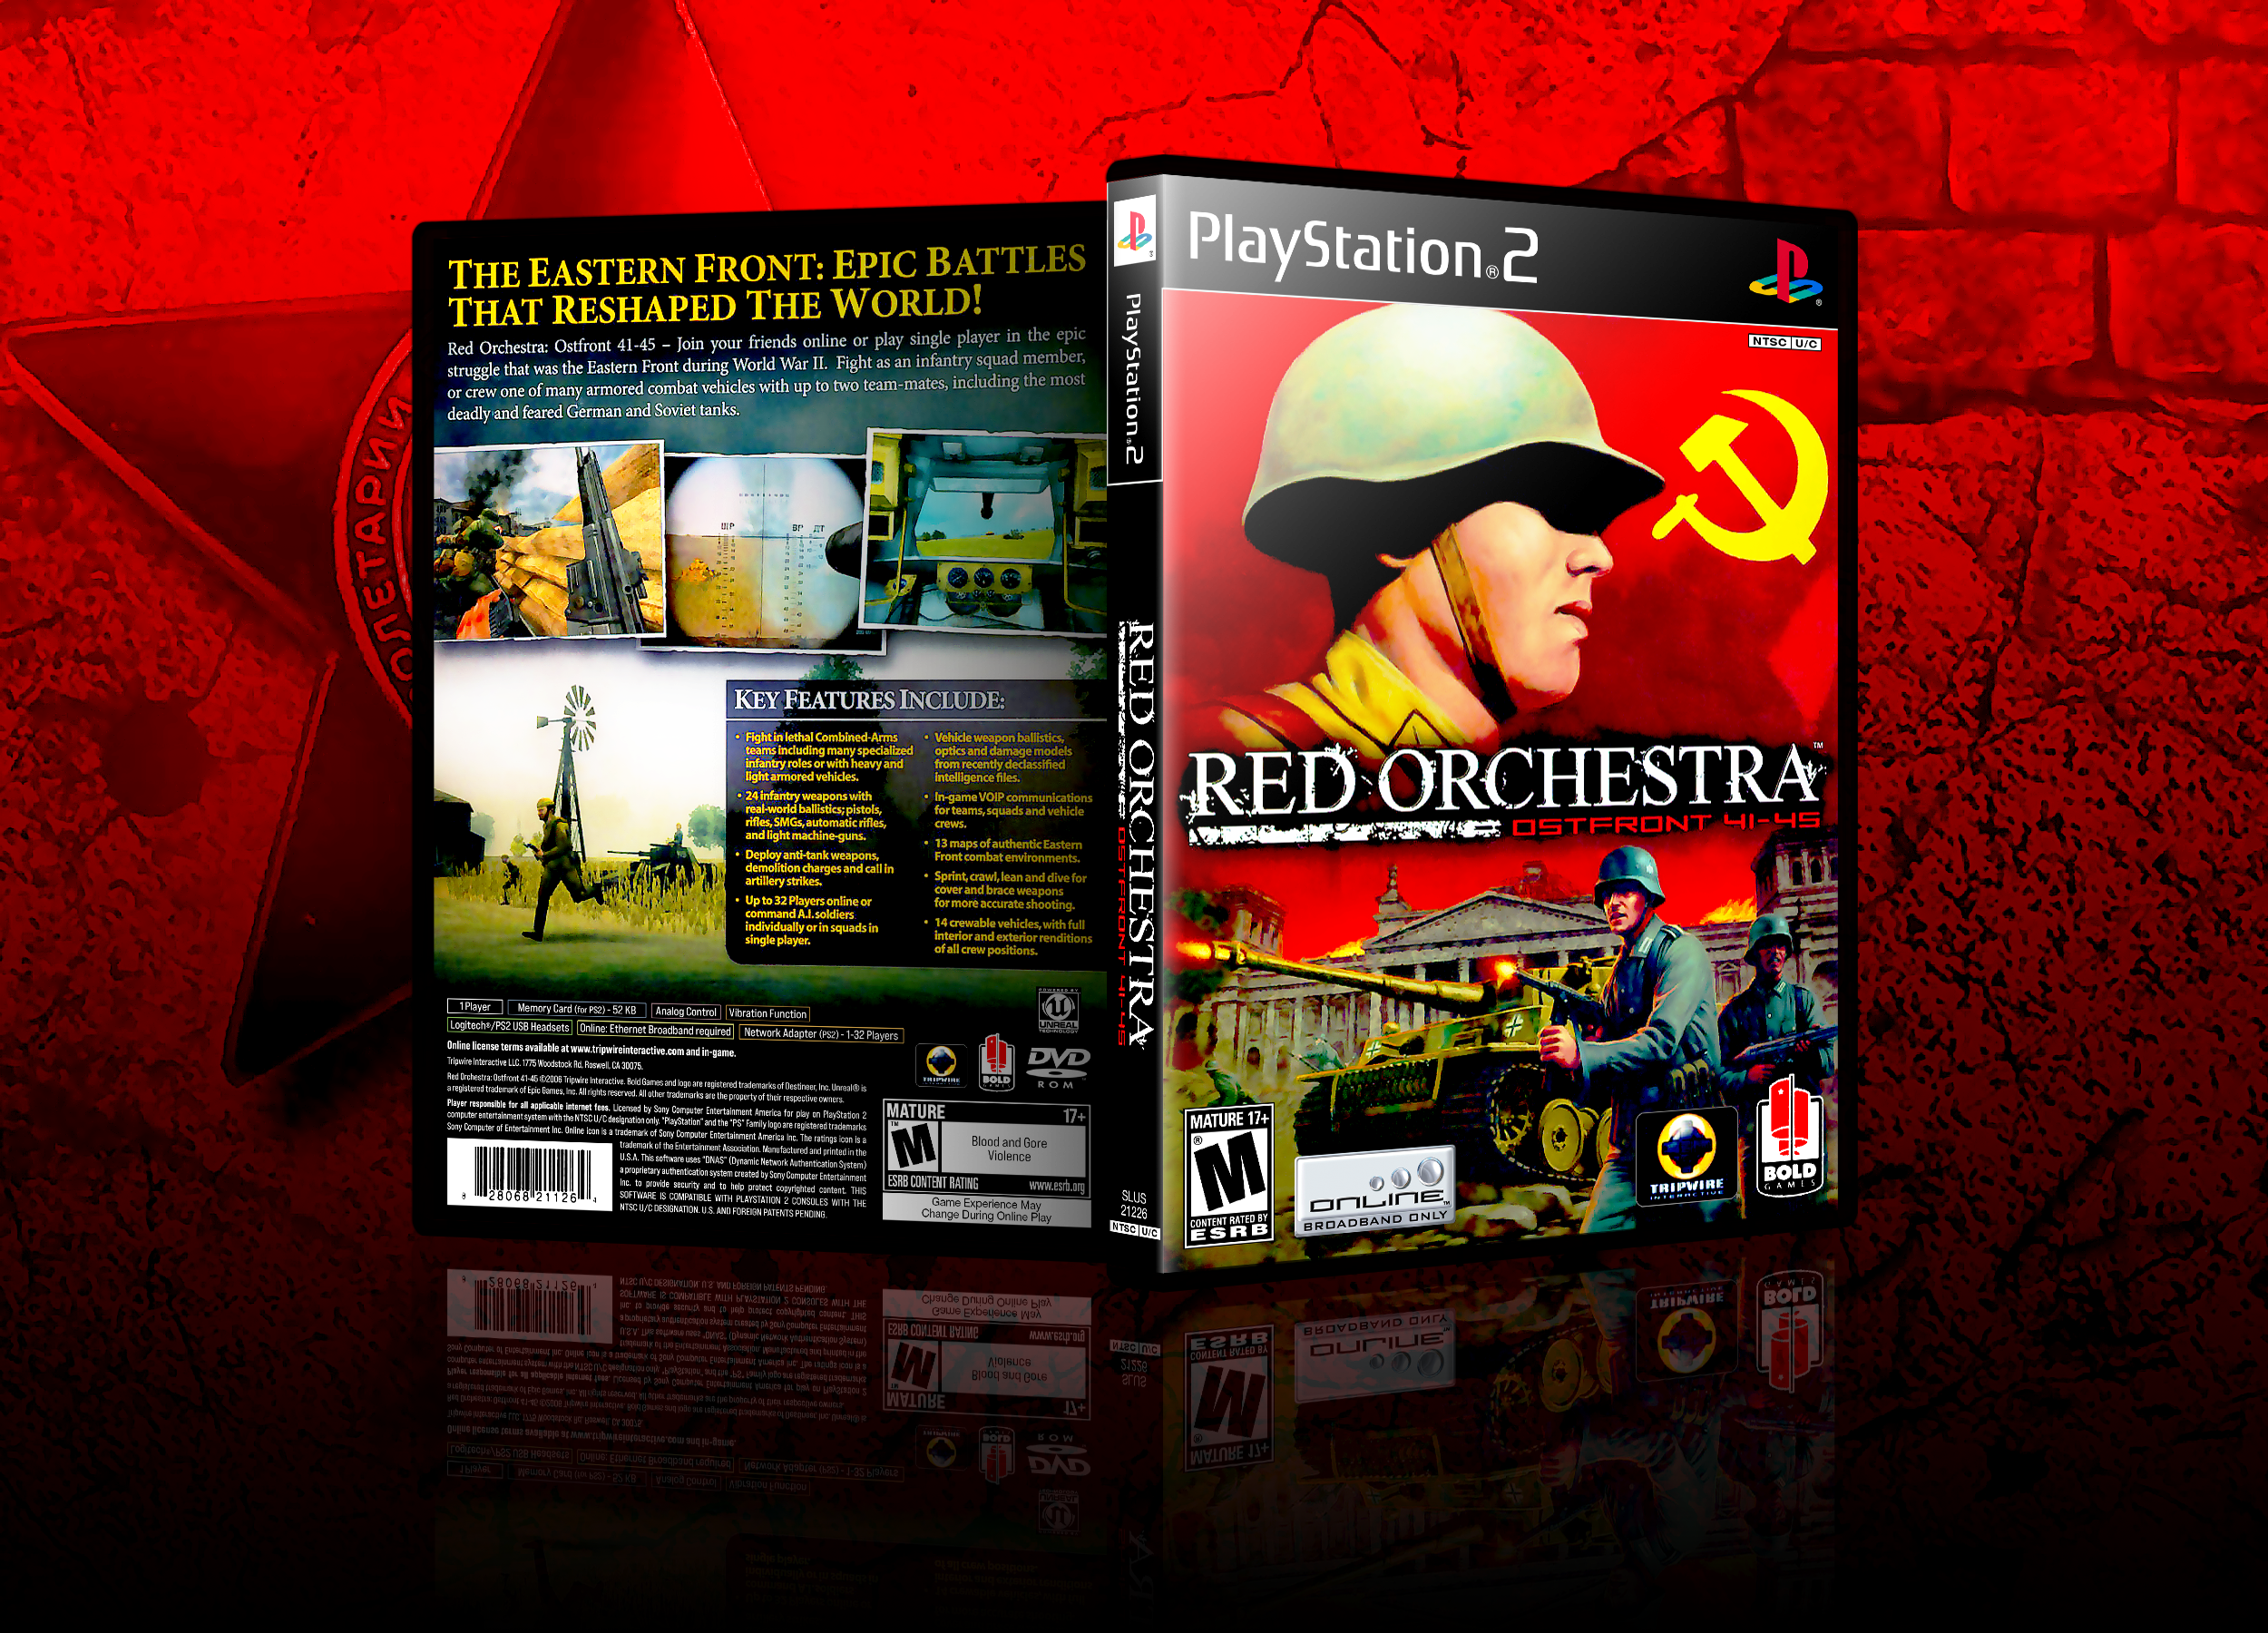 Red Orchestra: Ostfront 41-45 box cover